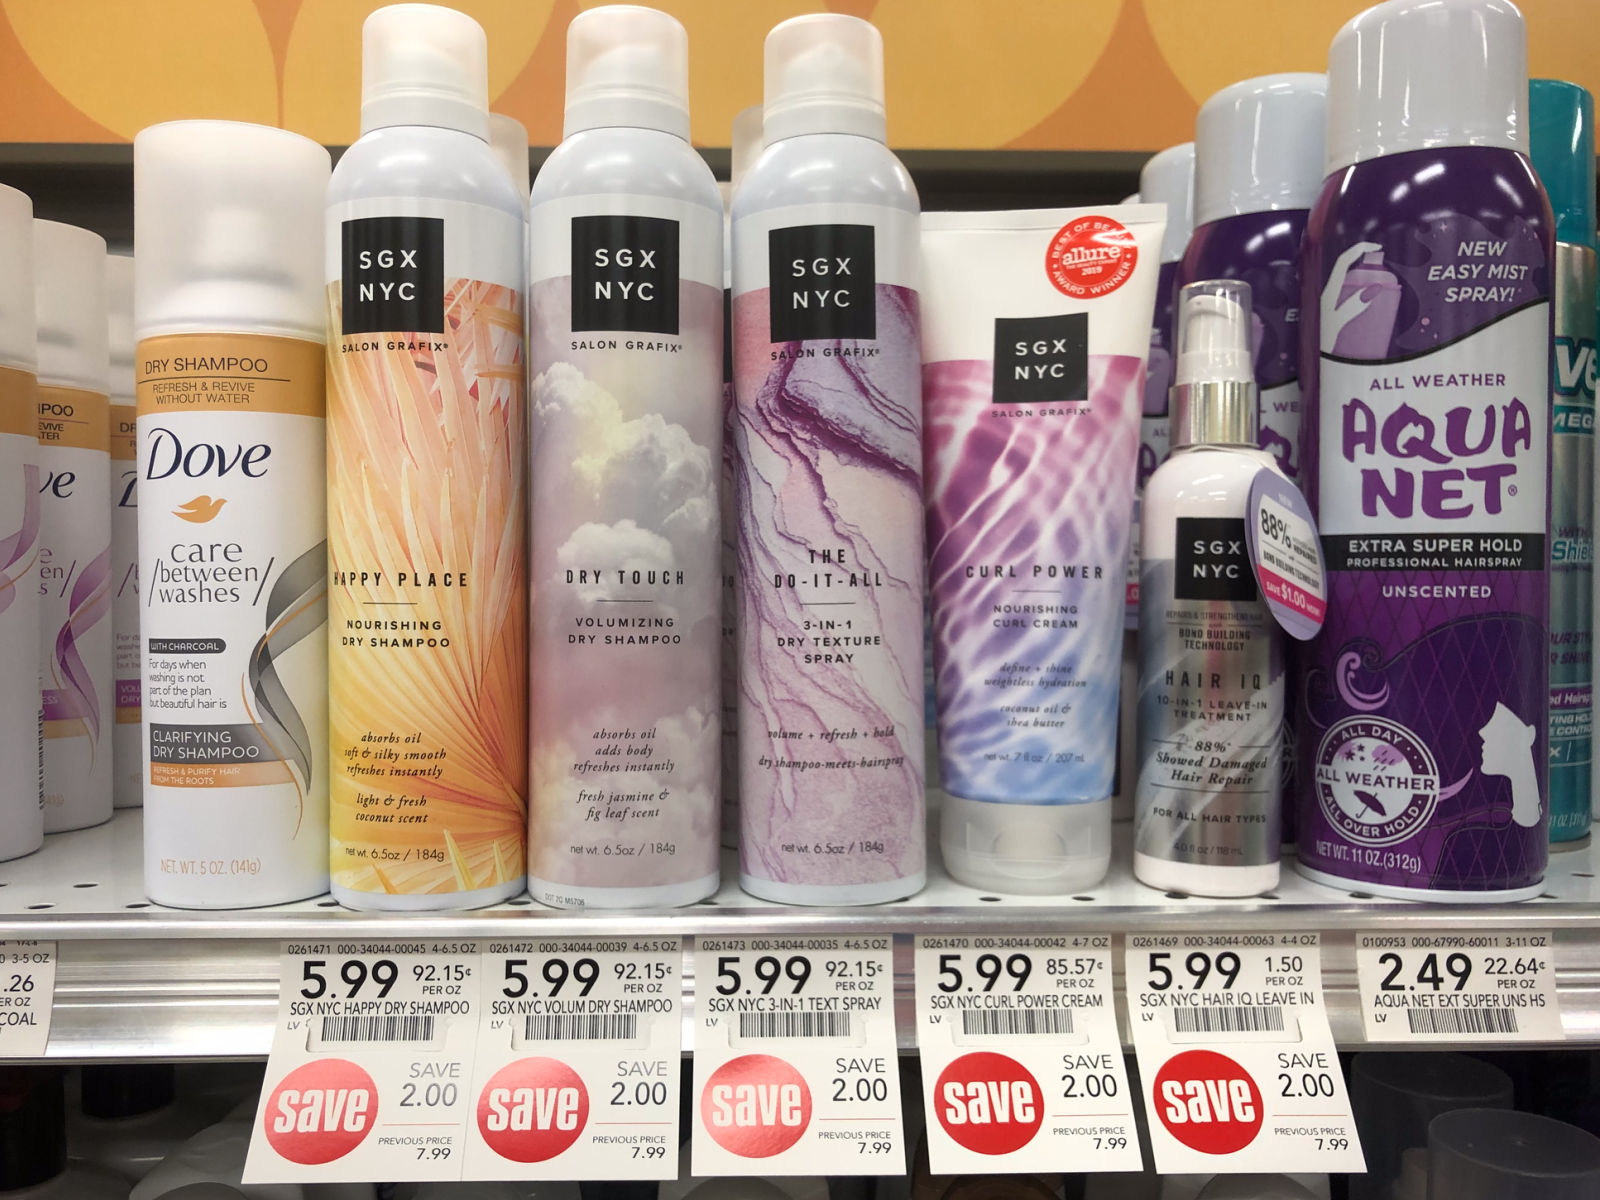 Super Deals On SGX NYC Haircare Items At Publix With The Sale AND Coupon Combo! on I Heart Publix 1